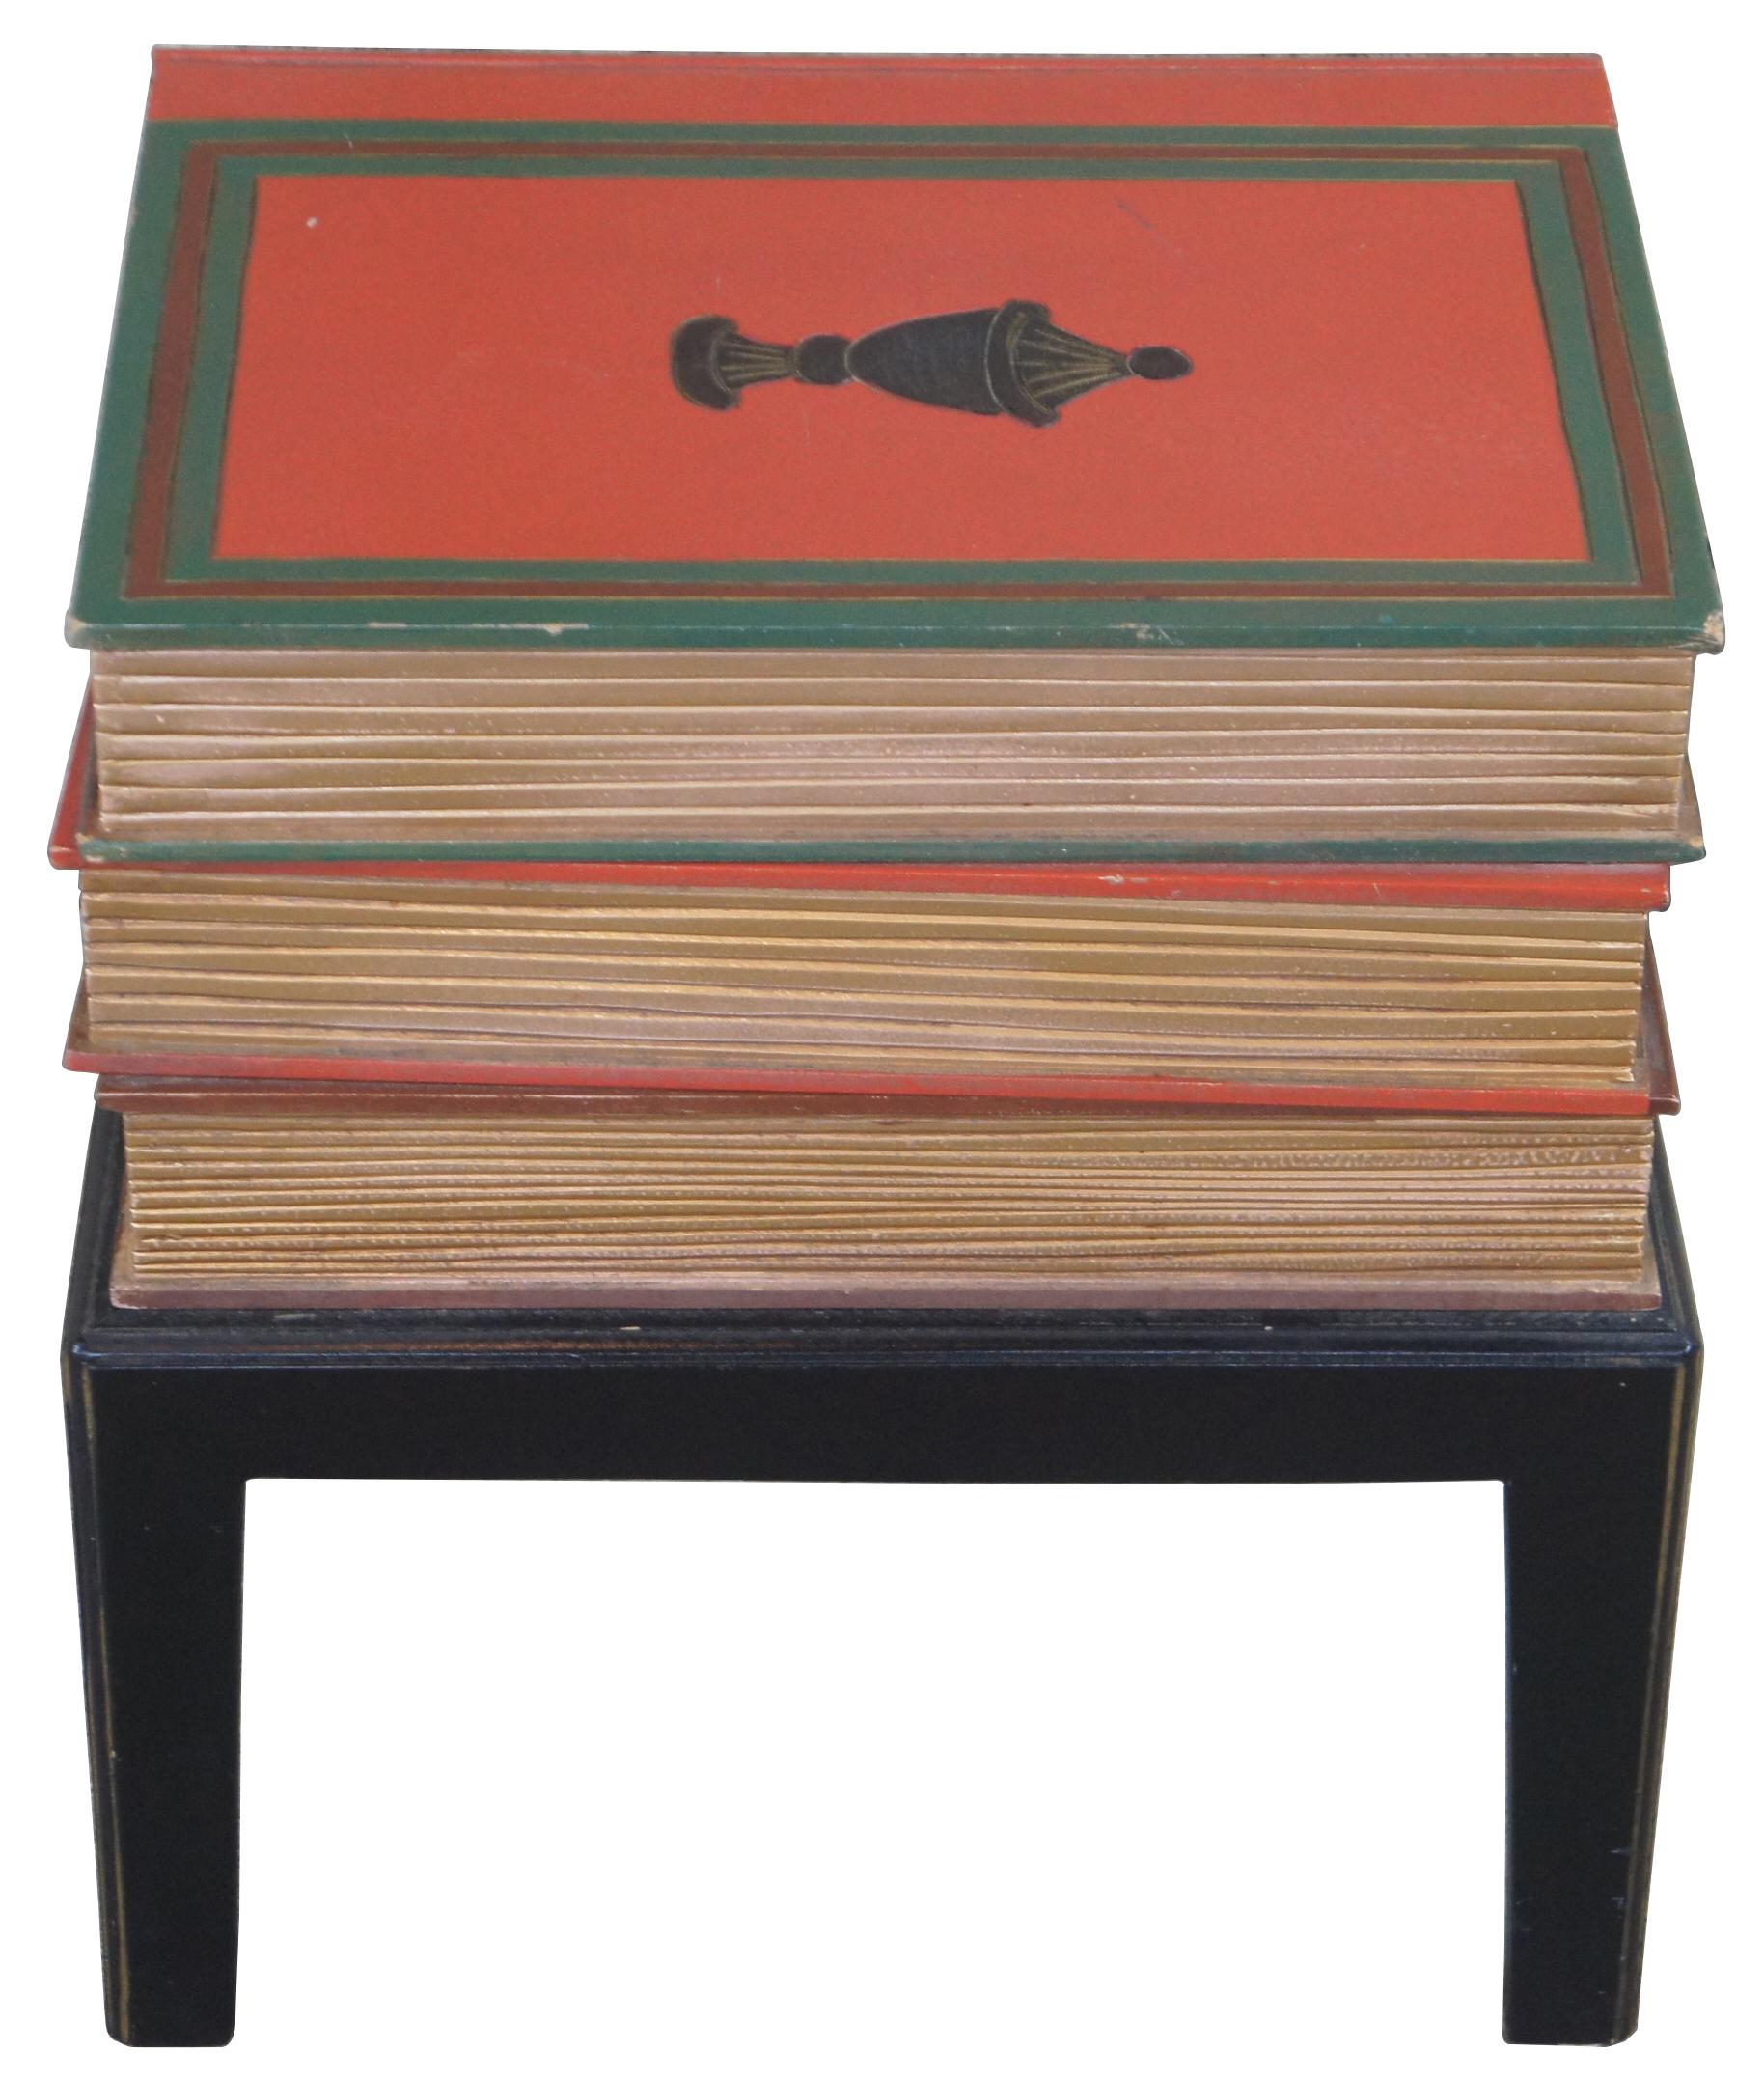 Vintage stacked book table. Features a trio of faux leather books with gold pages and black base. The top book has a neoclassical style urn motif.
   